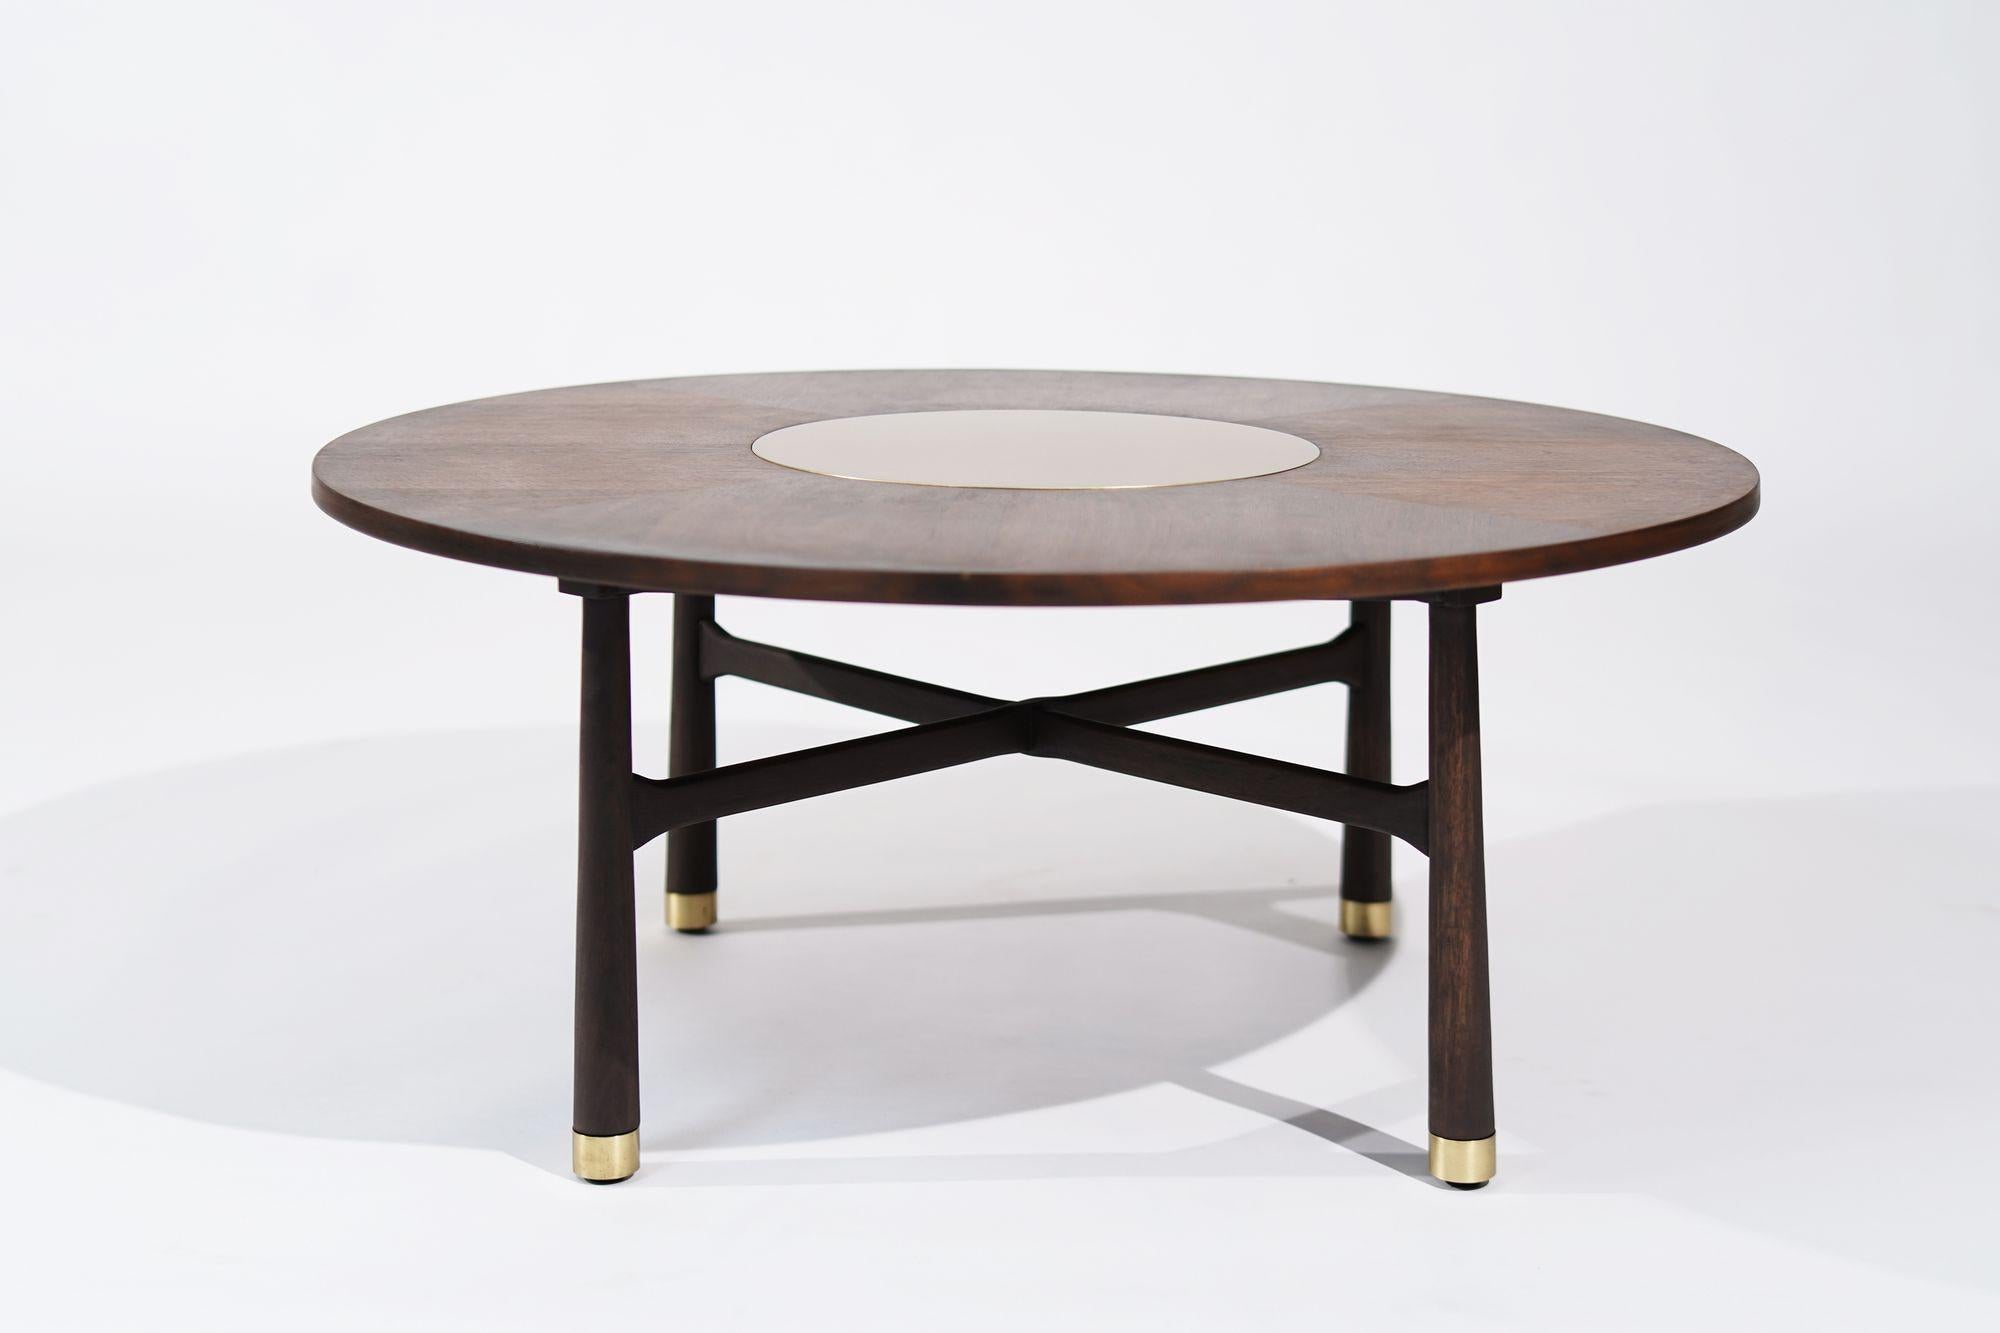 Elevate your space with our restored vintage walnut and brass coffee table by Harvey Probber, circa 1950s. Meticulously refurbished by Stamford Modern, it boasts mid-century charm with brass sabots and a distinctive circular insert. This iconic